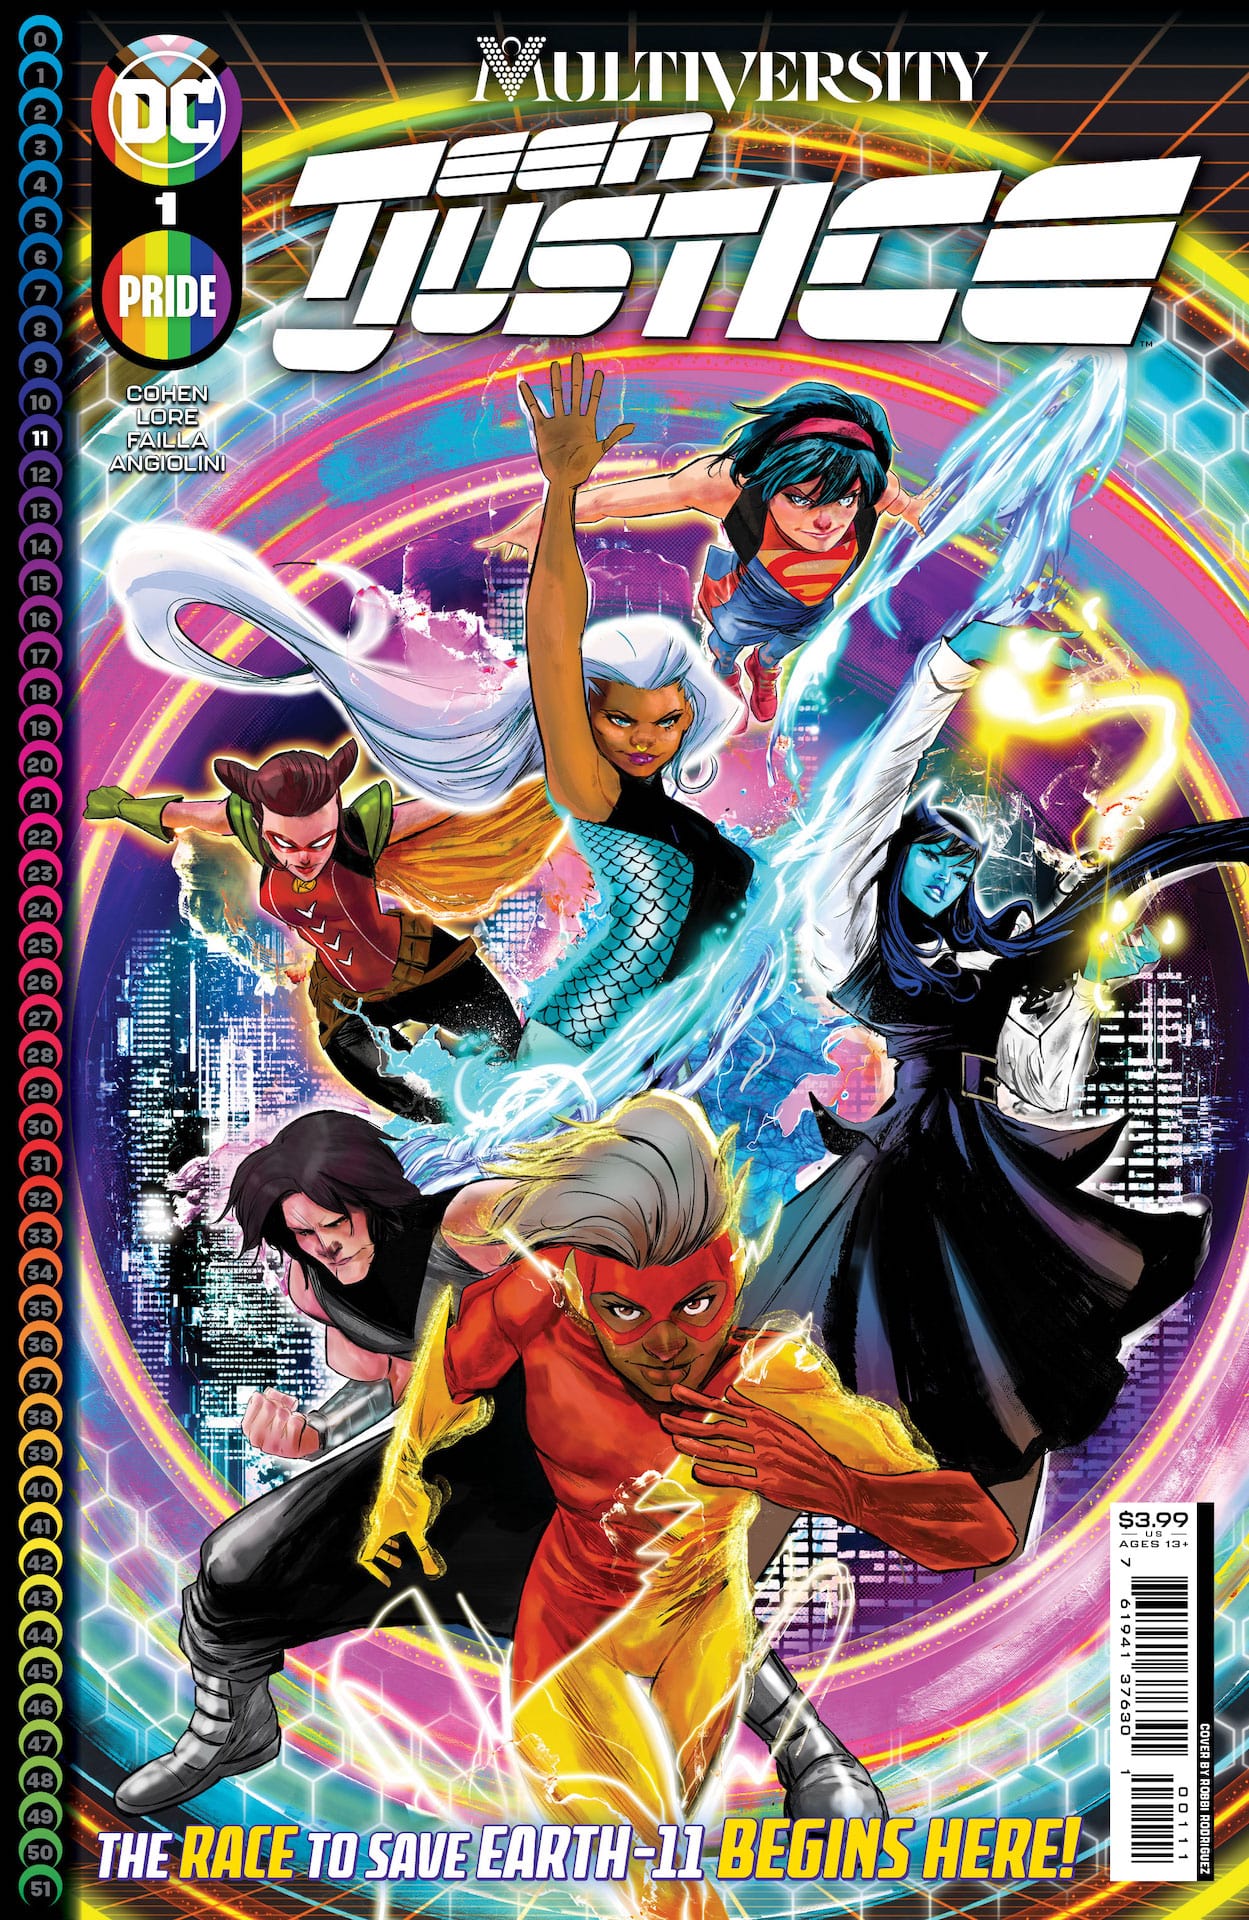 DC Preview: Multiversity: Teen Justice #1